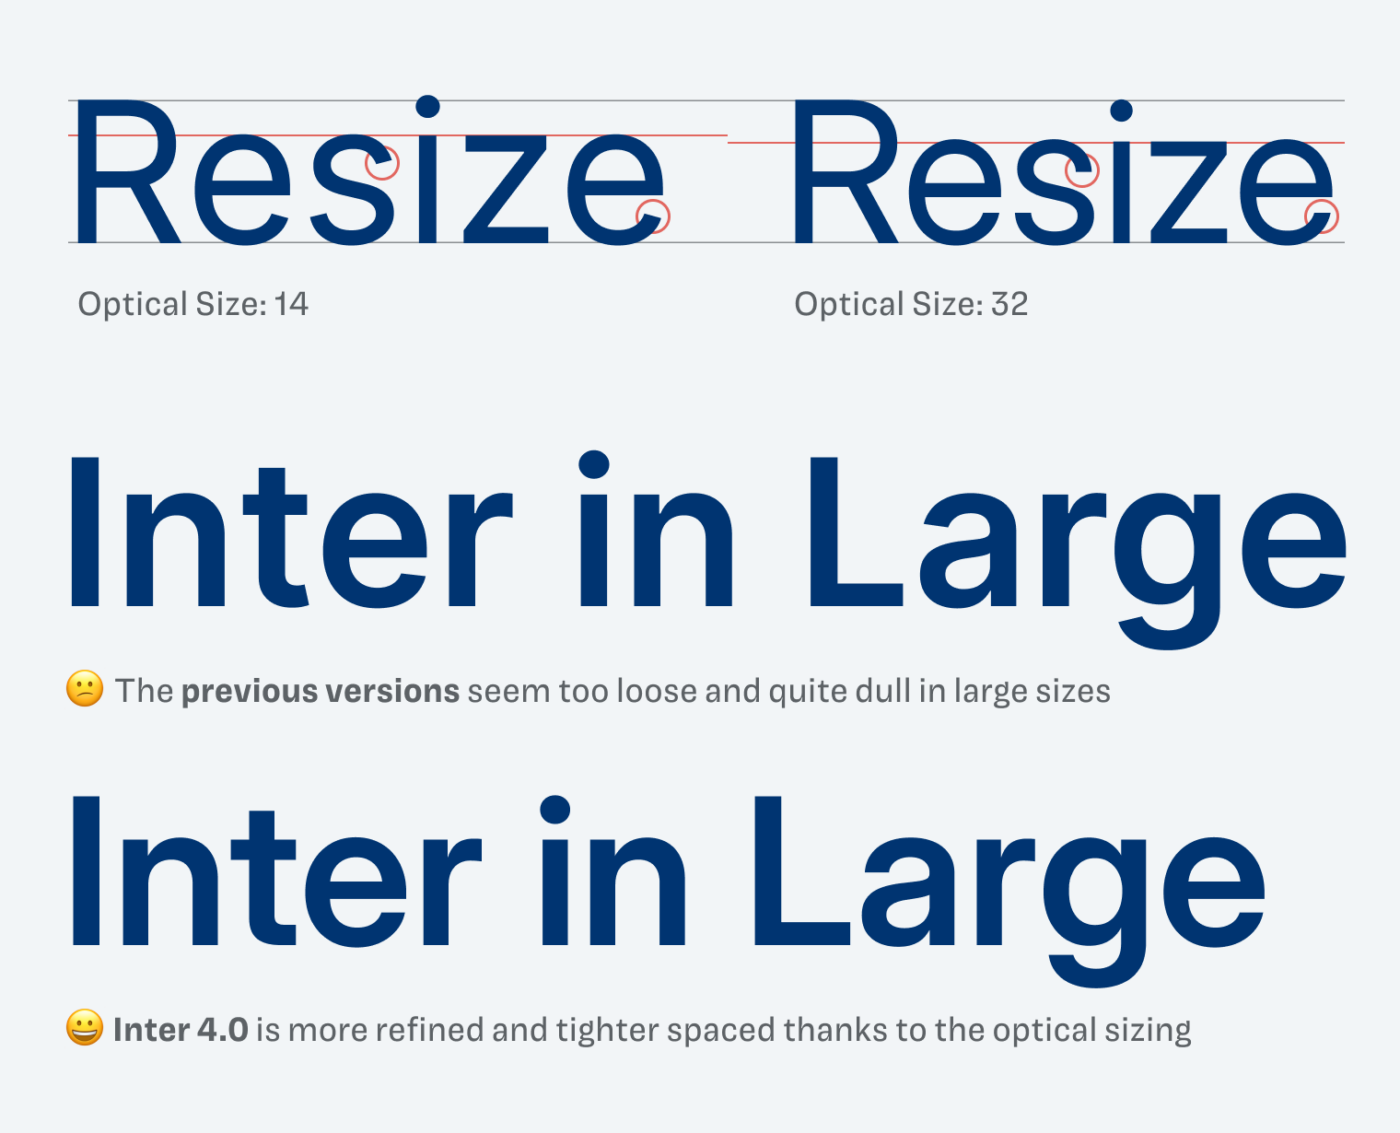 Optical Size: 14 compared with 32. The previous versions seem too loose and quite dull in large sizes. Inter 4.0 is more refined and tighter spaced thanks to the optical sizing